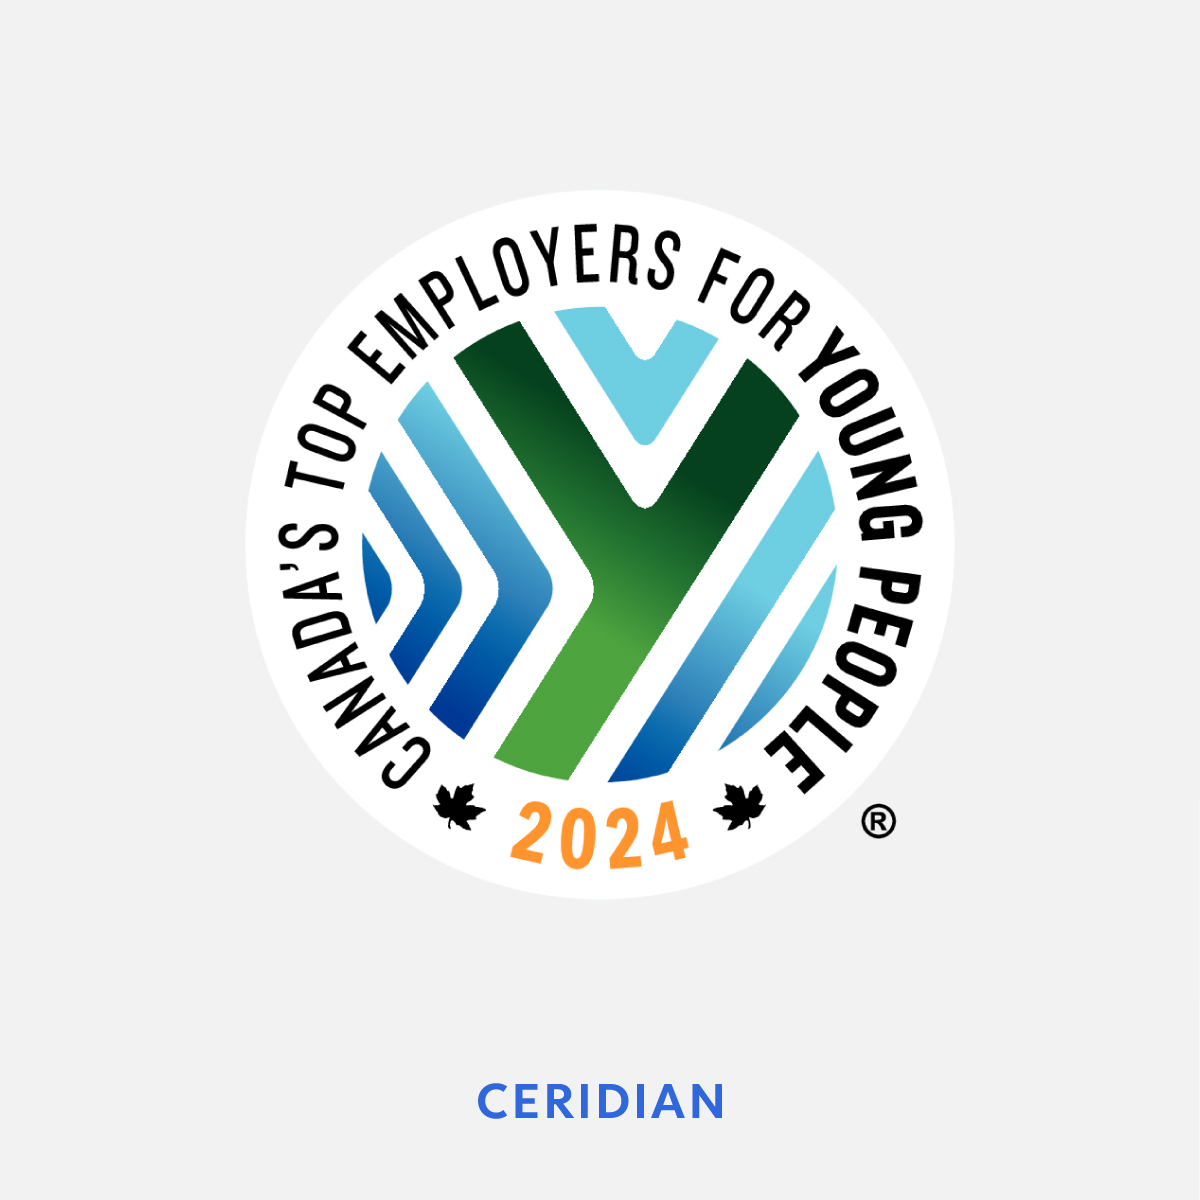 We’re committed to be an industry leader that #makesworklifebetter for our employees. It’s an honour to be named one of Canada’s Top Employers for Young People. Read about our award-winning efforts here: reviews.canadastop100.com/top-employer-c…